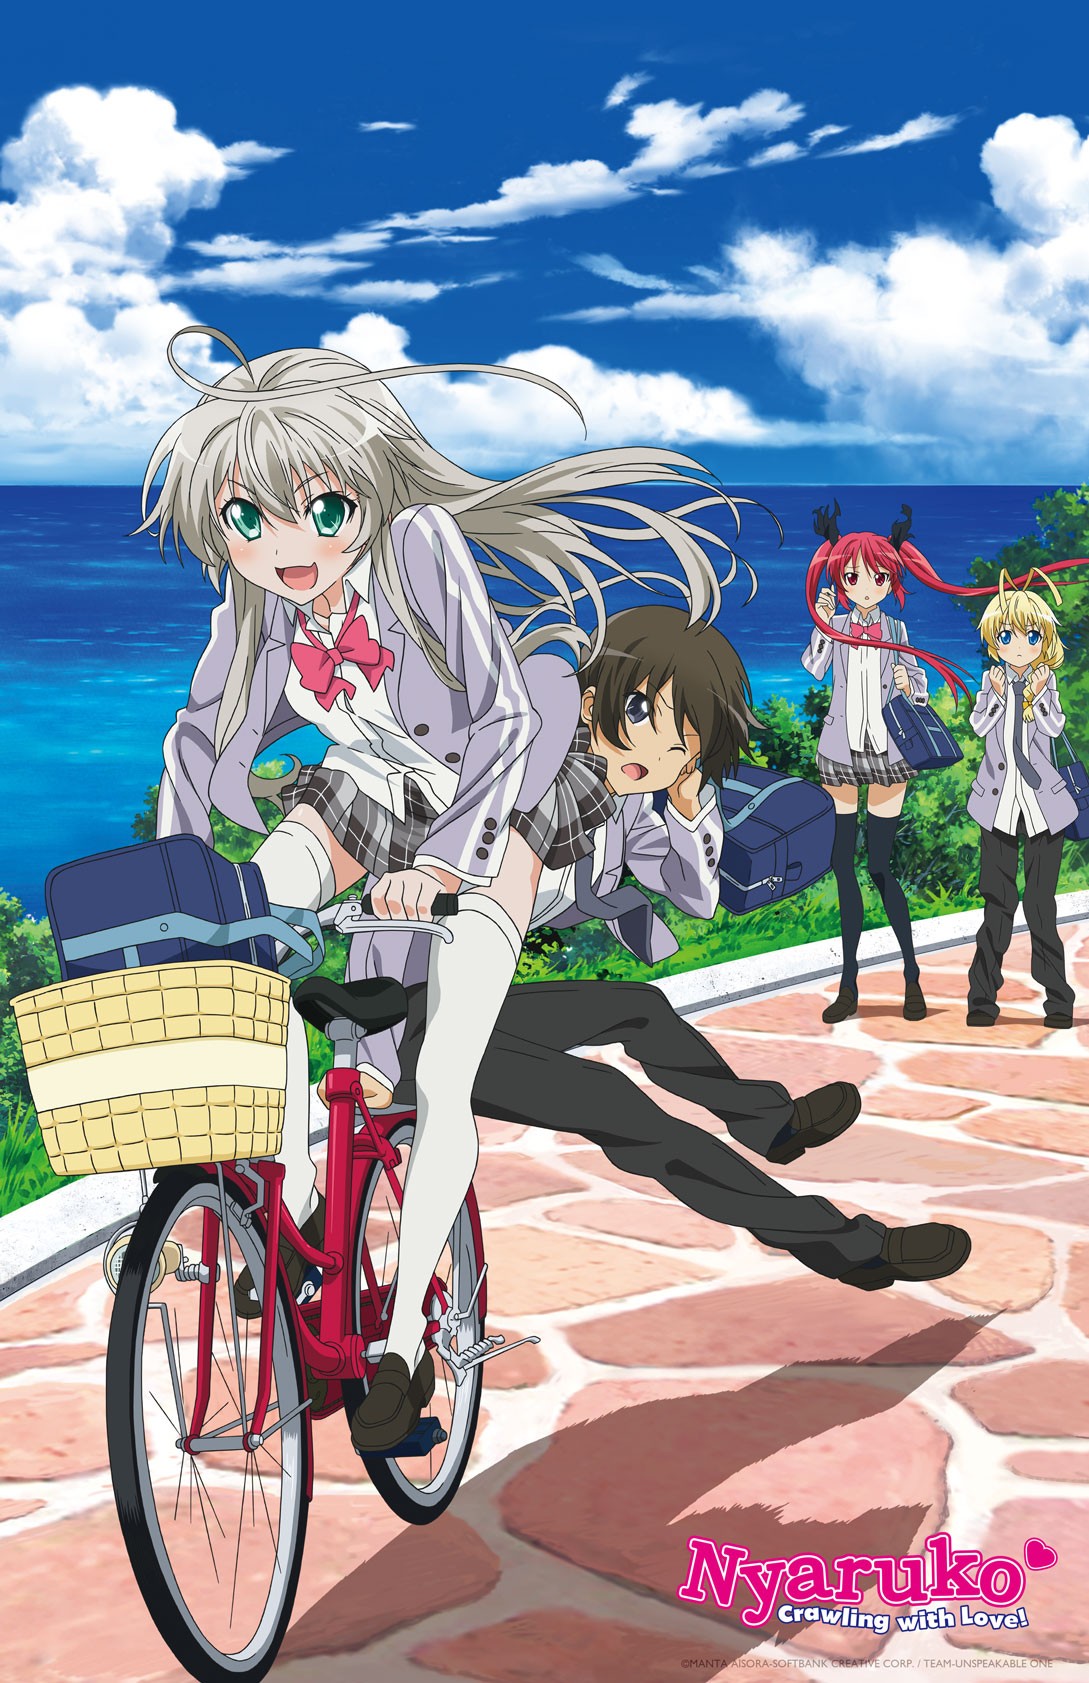 Amazing Nyaruko: Crawling With Love! Pictures & Backgrounds